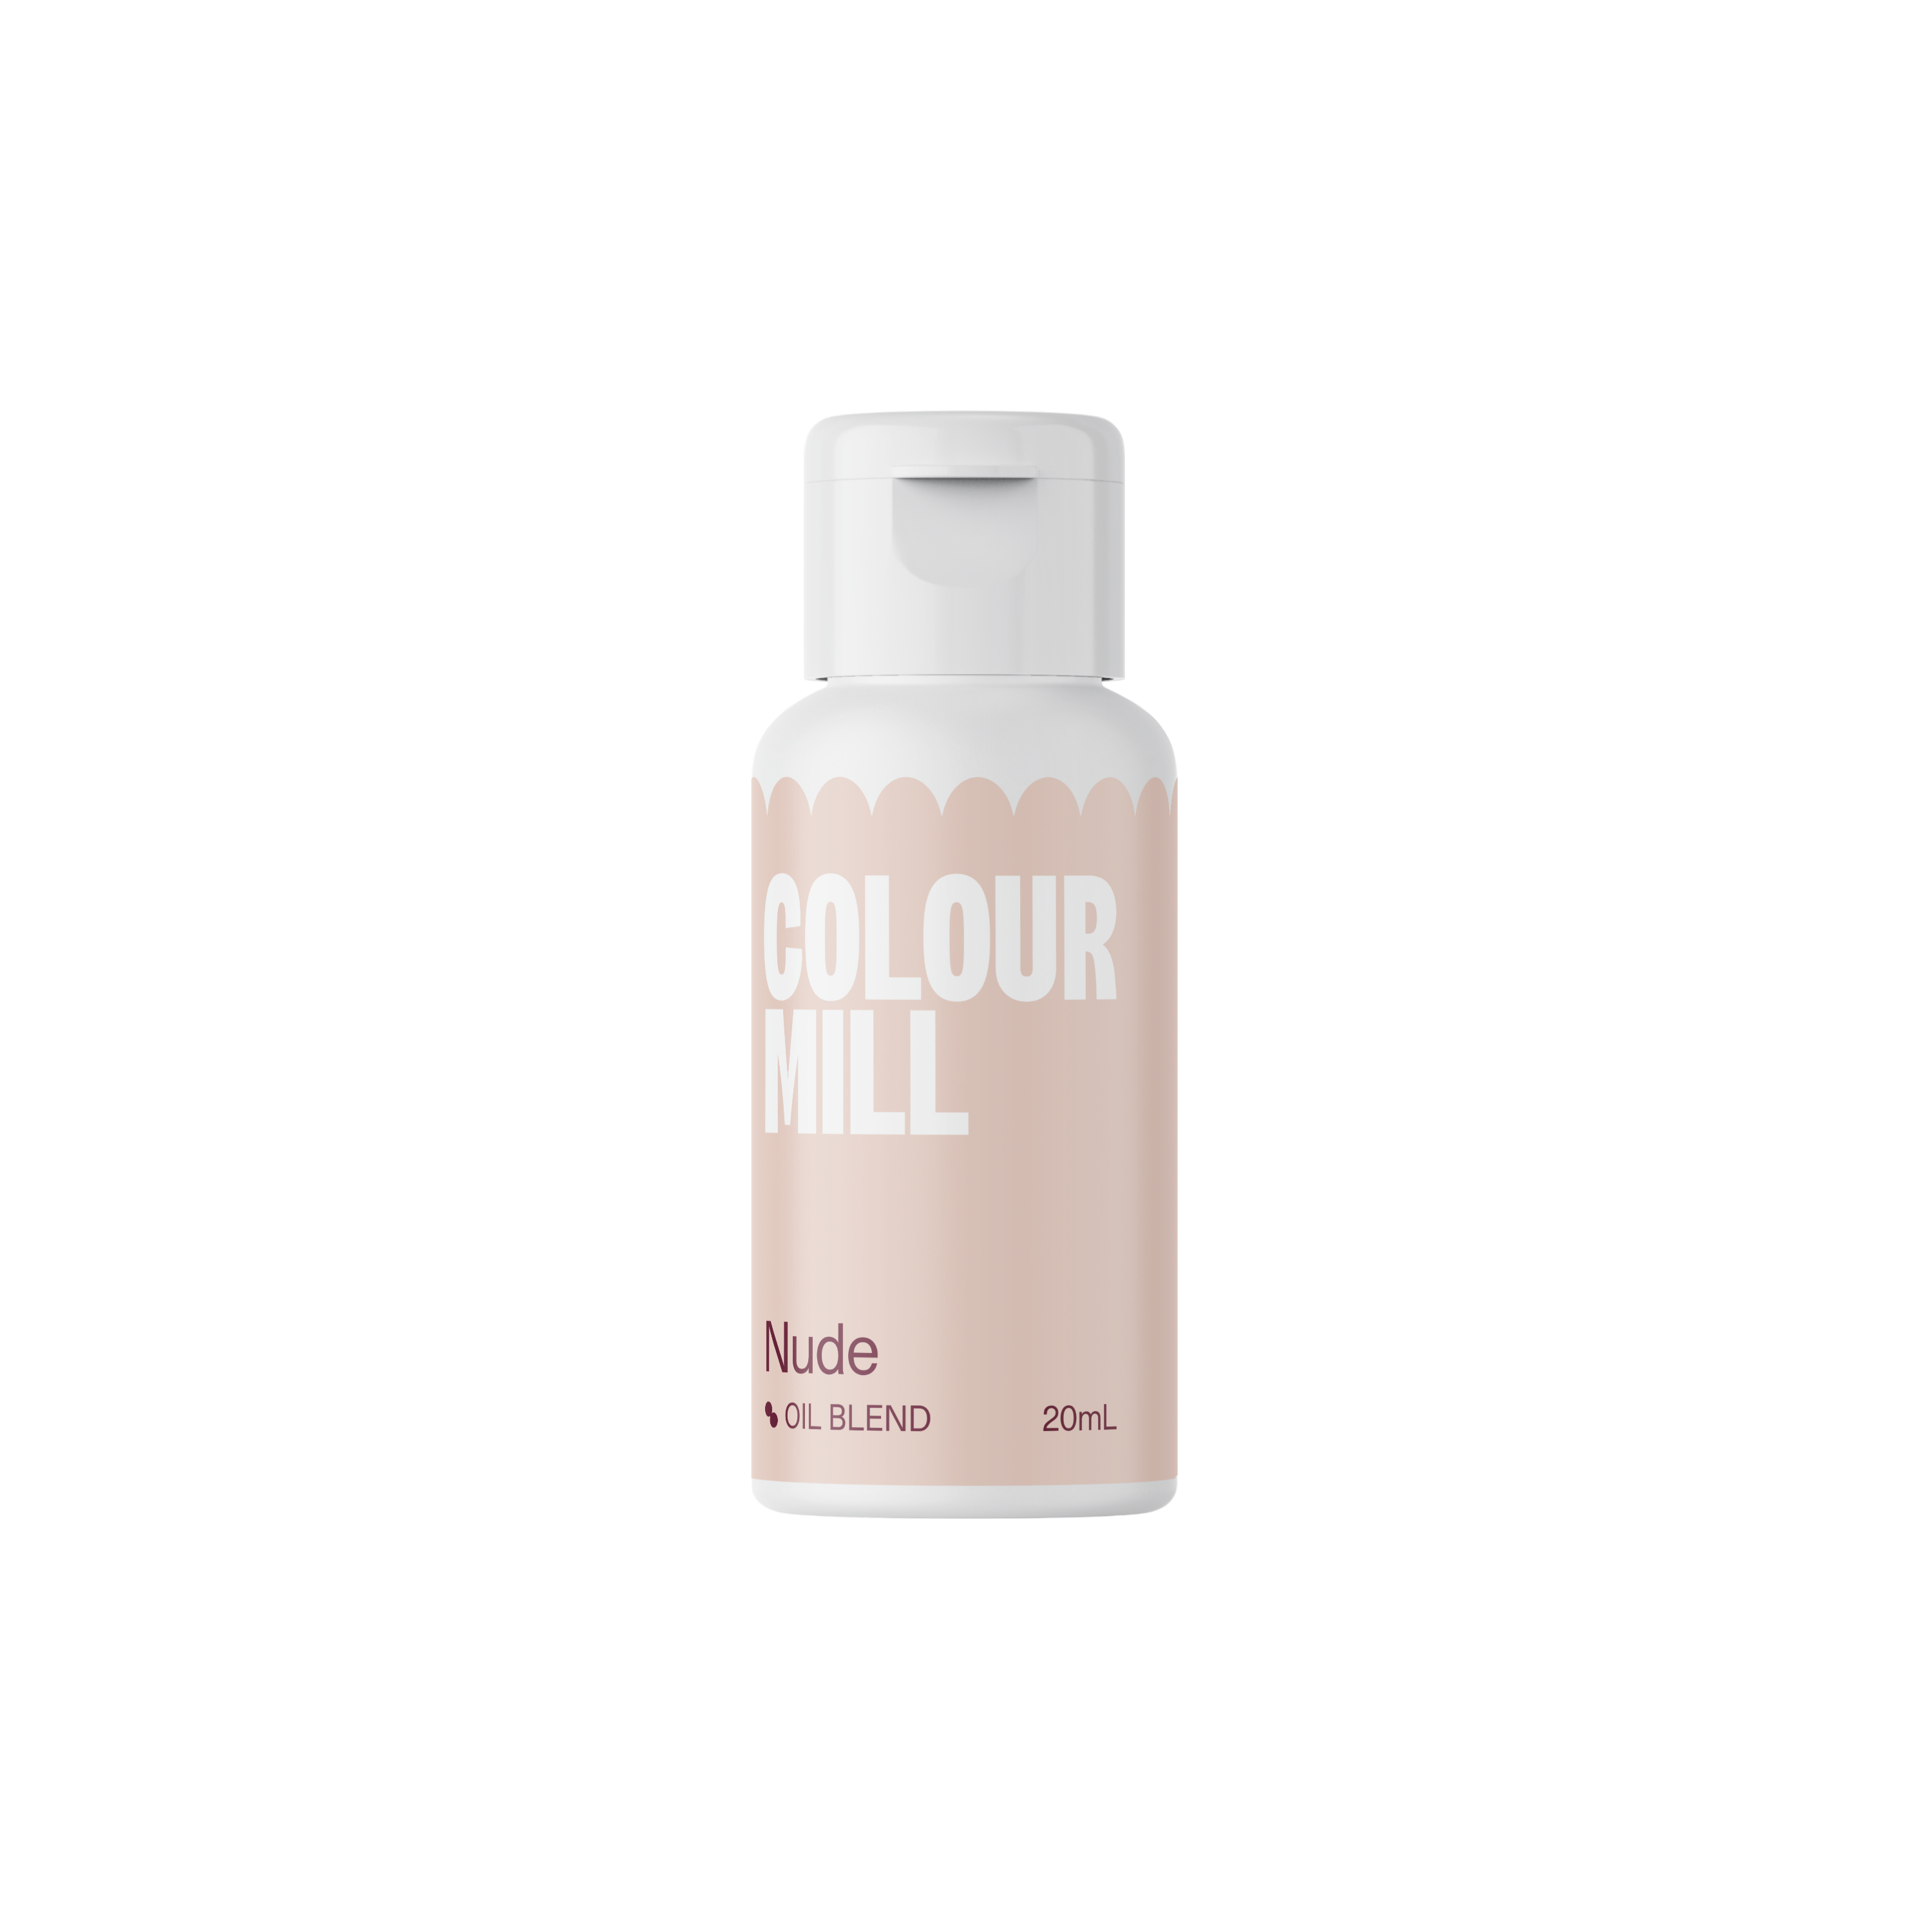 Nude - Oil Blendproduct image